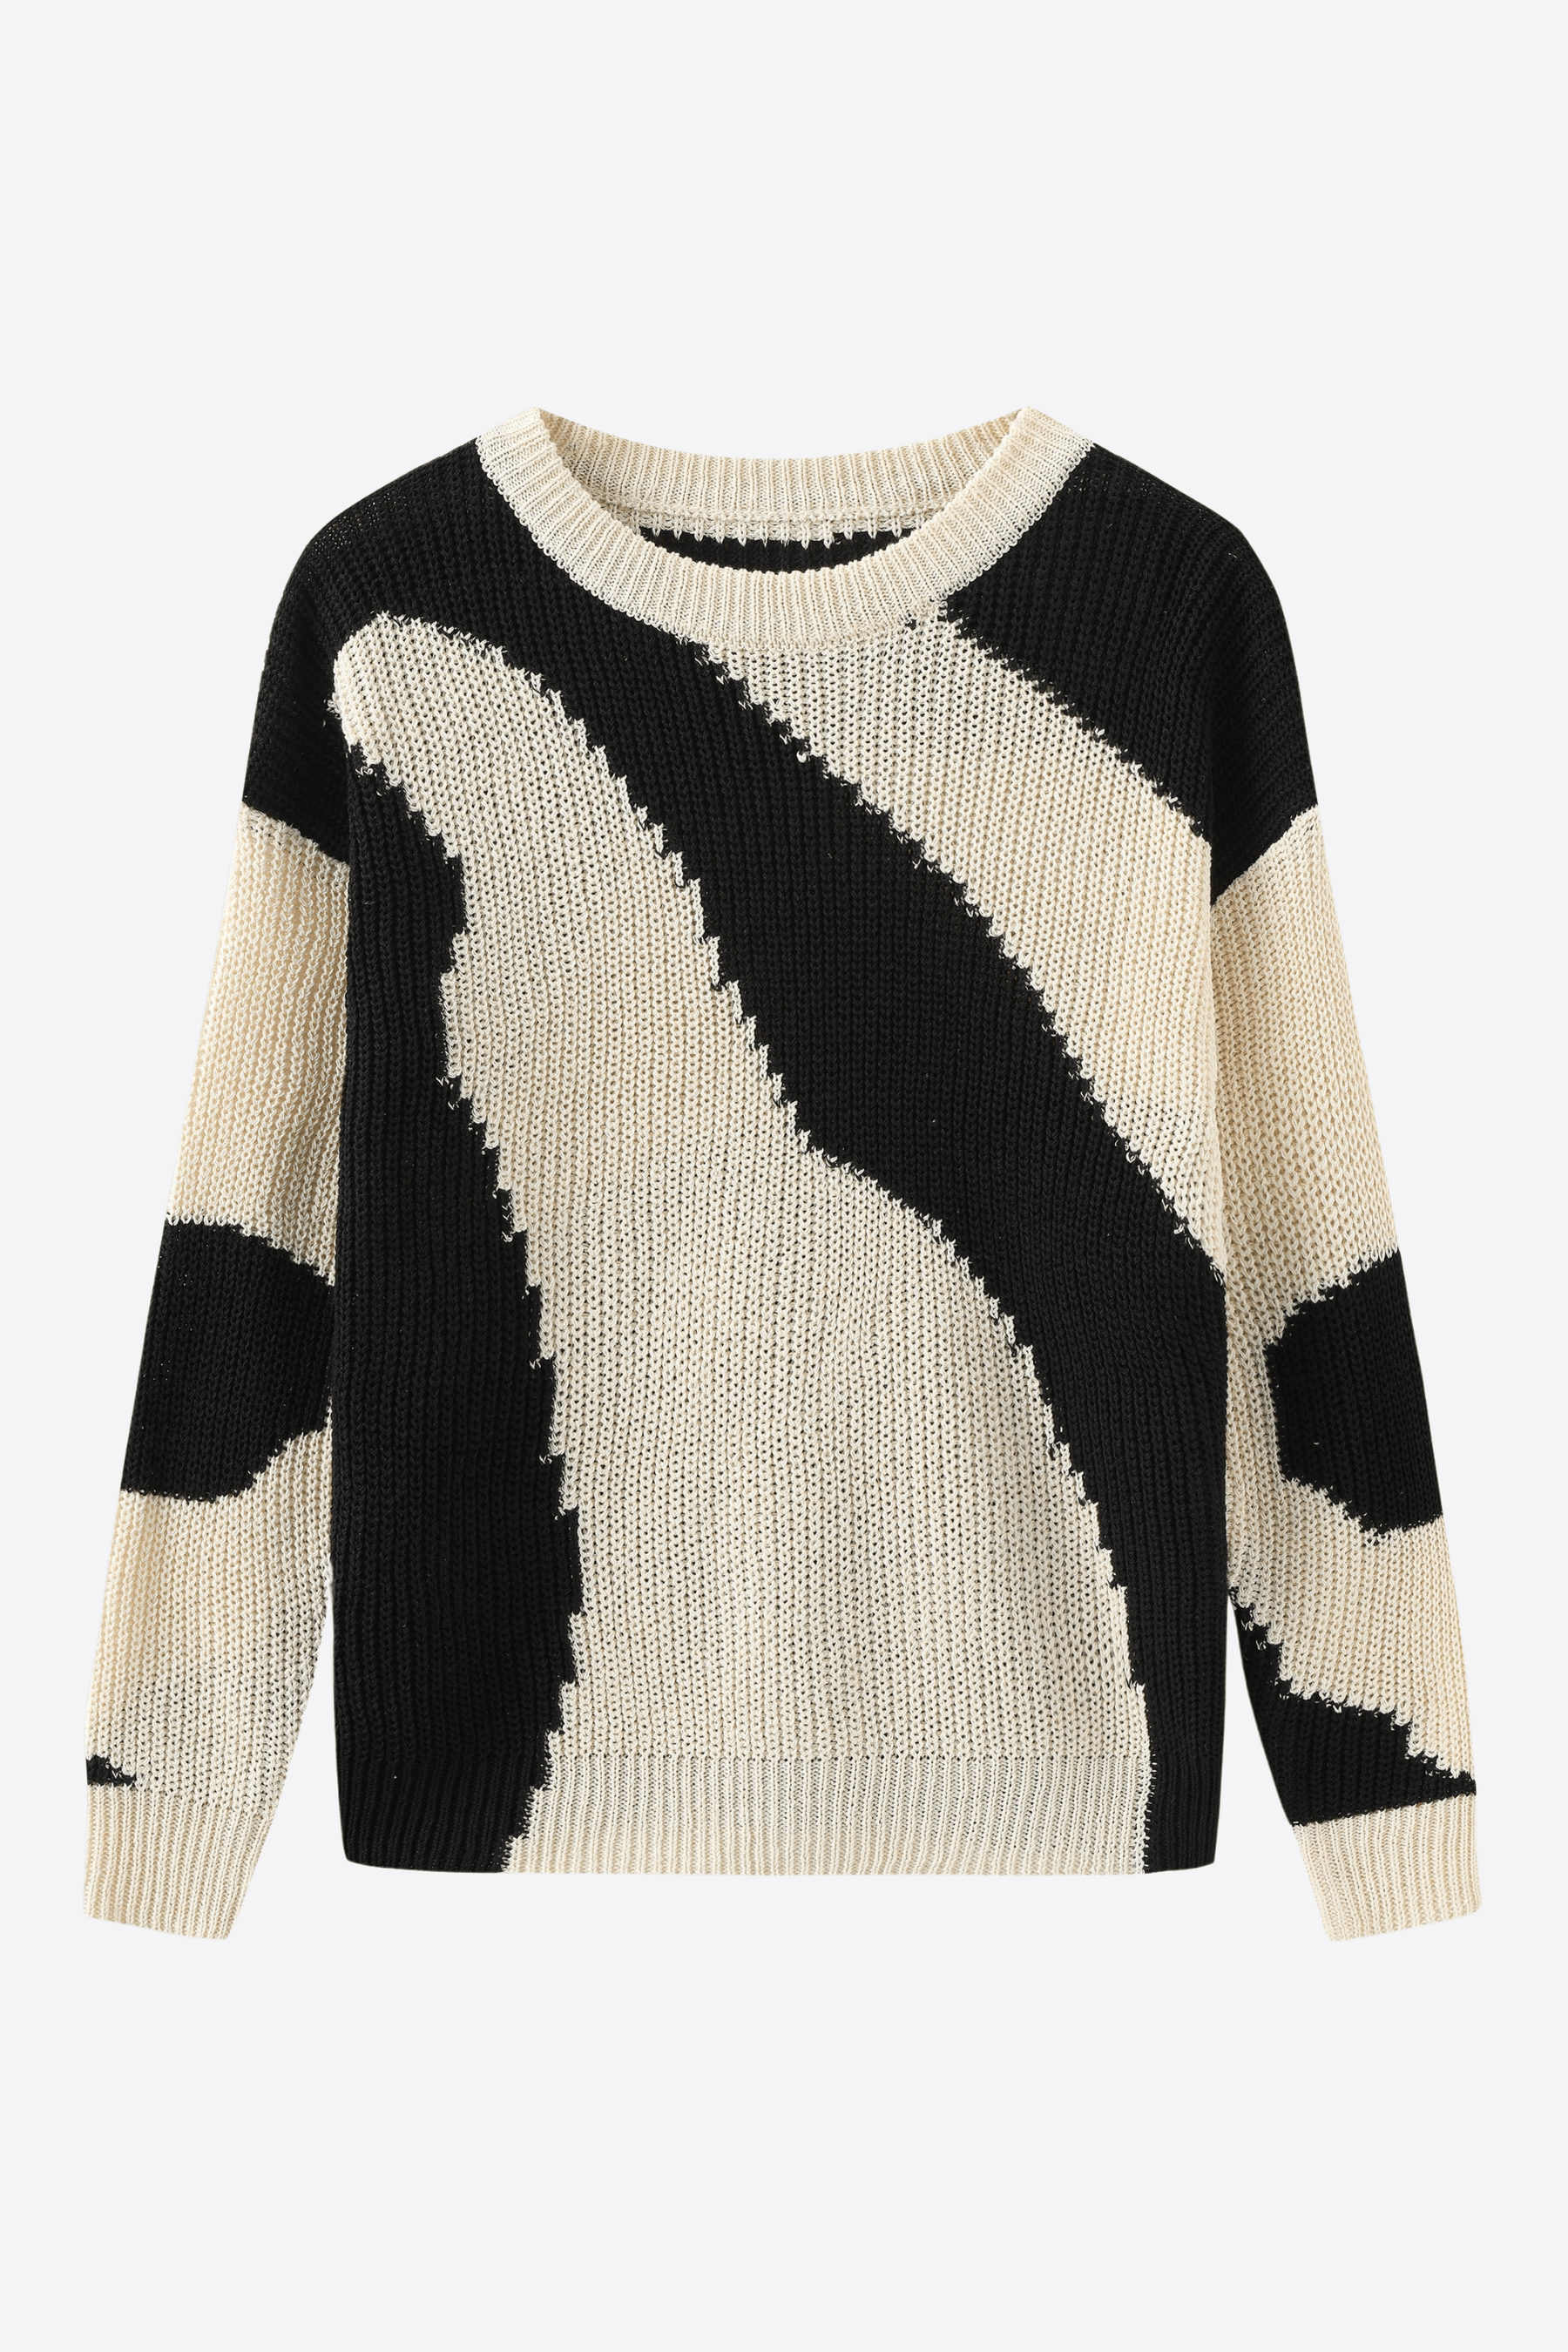 Alessandro Toscani™ Black / M DIEGO™ | Knitted Sweater